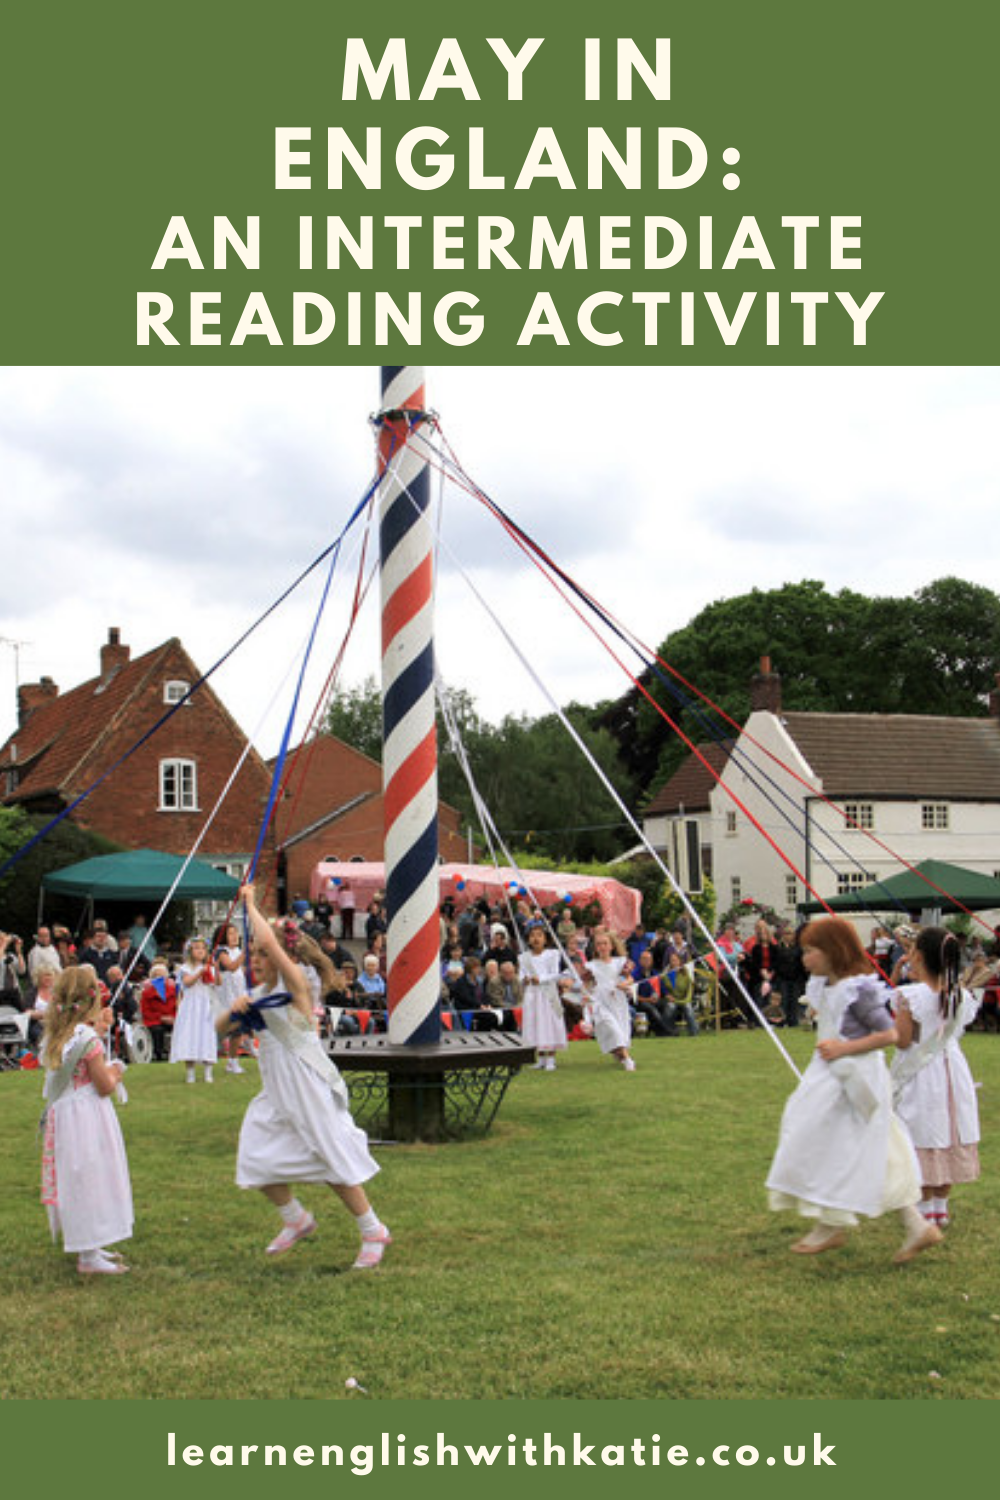 Children dancing round maypole. Text reads May in England an intermediate reading activity